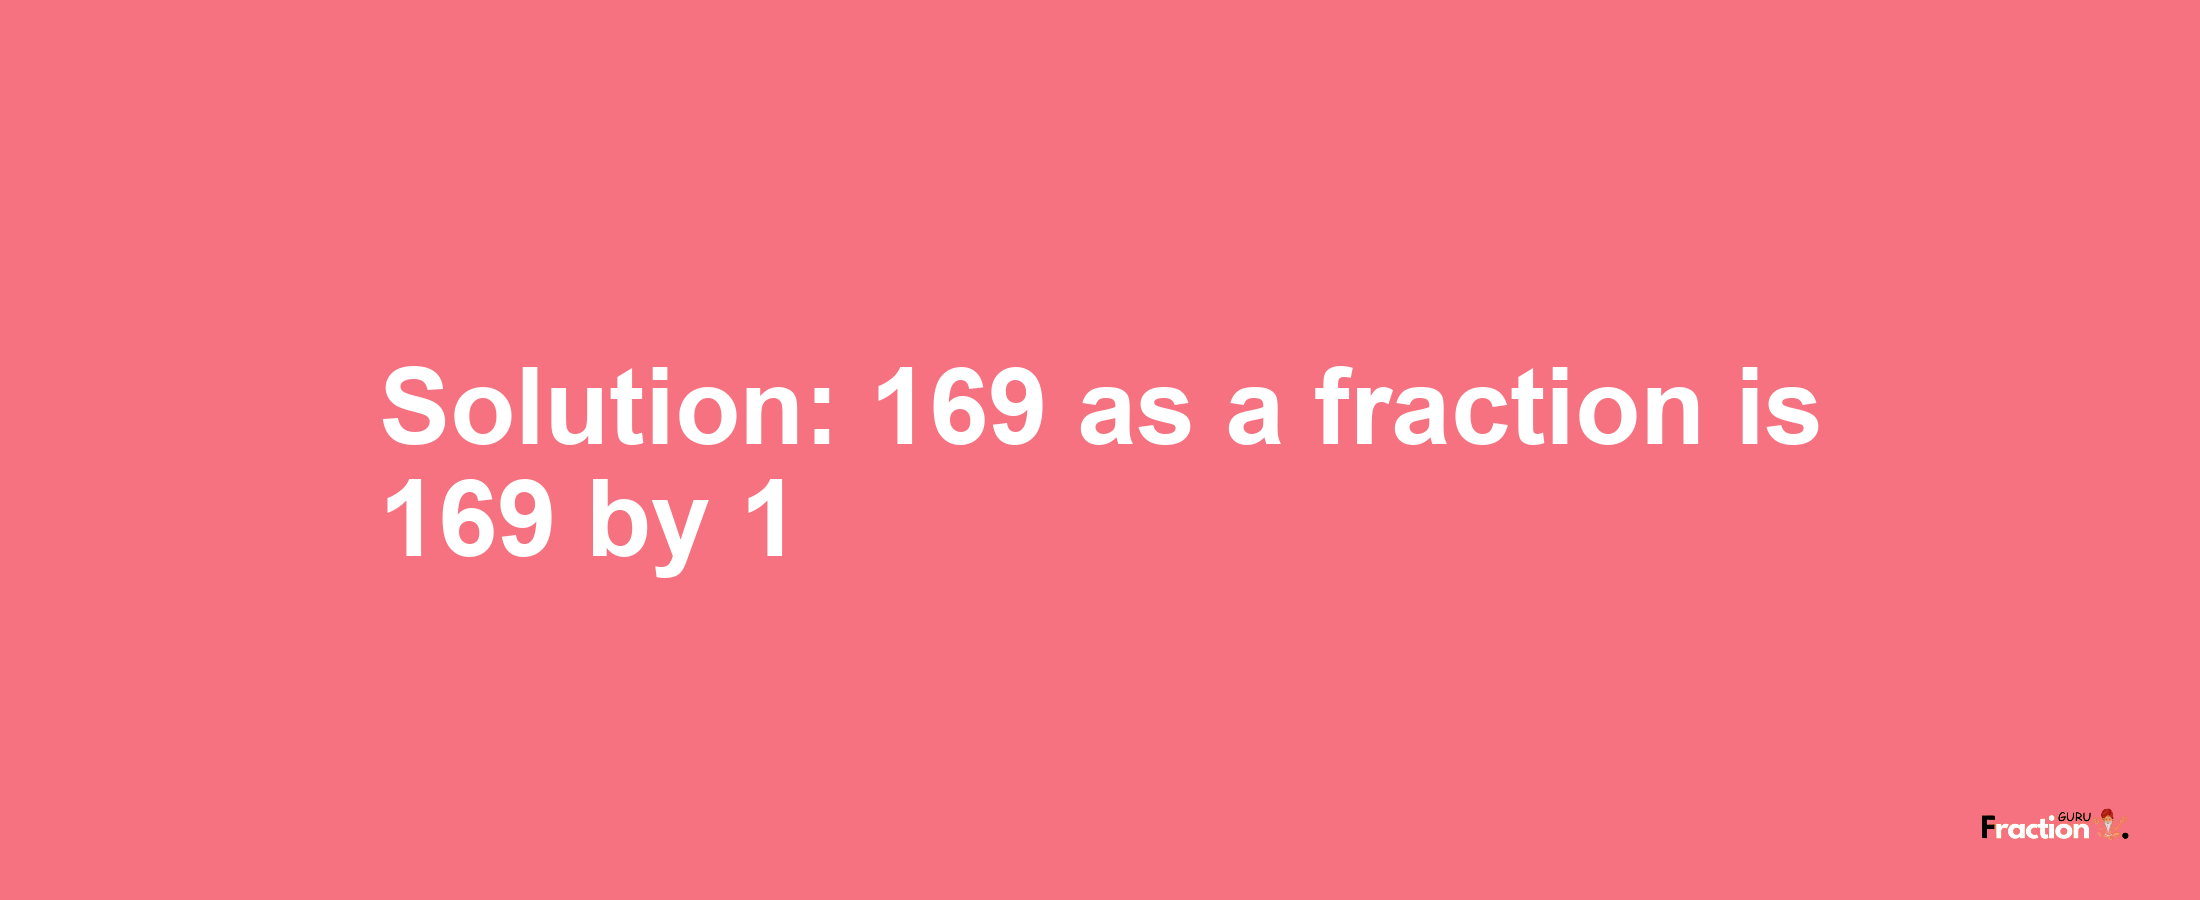 Solution:169 as a fraction is 169/1